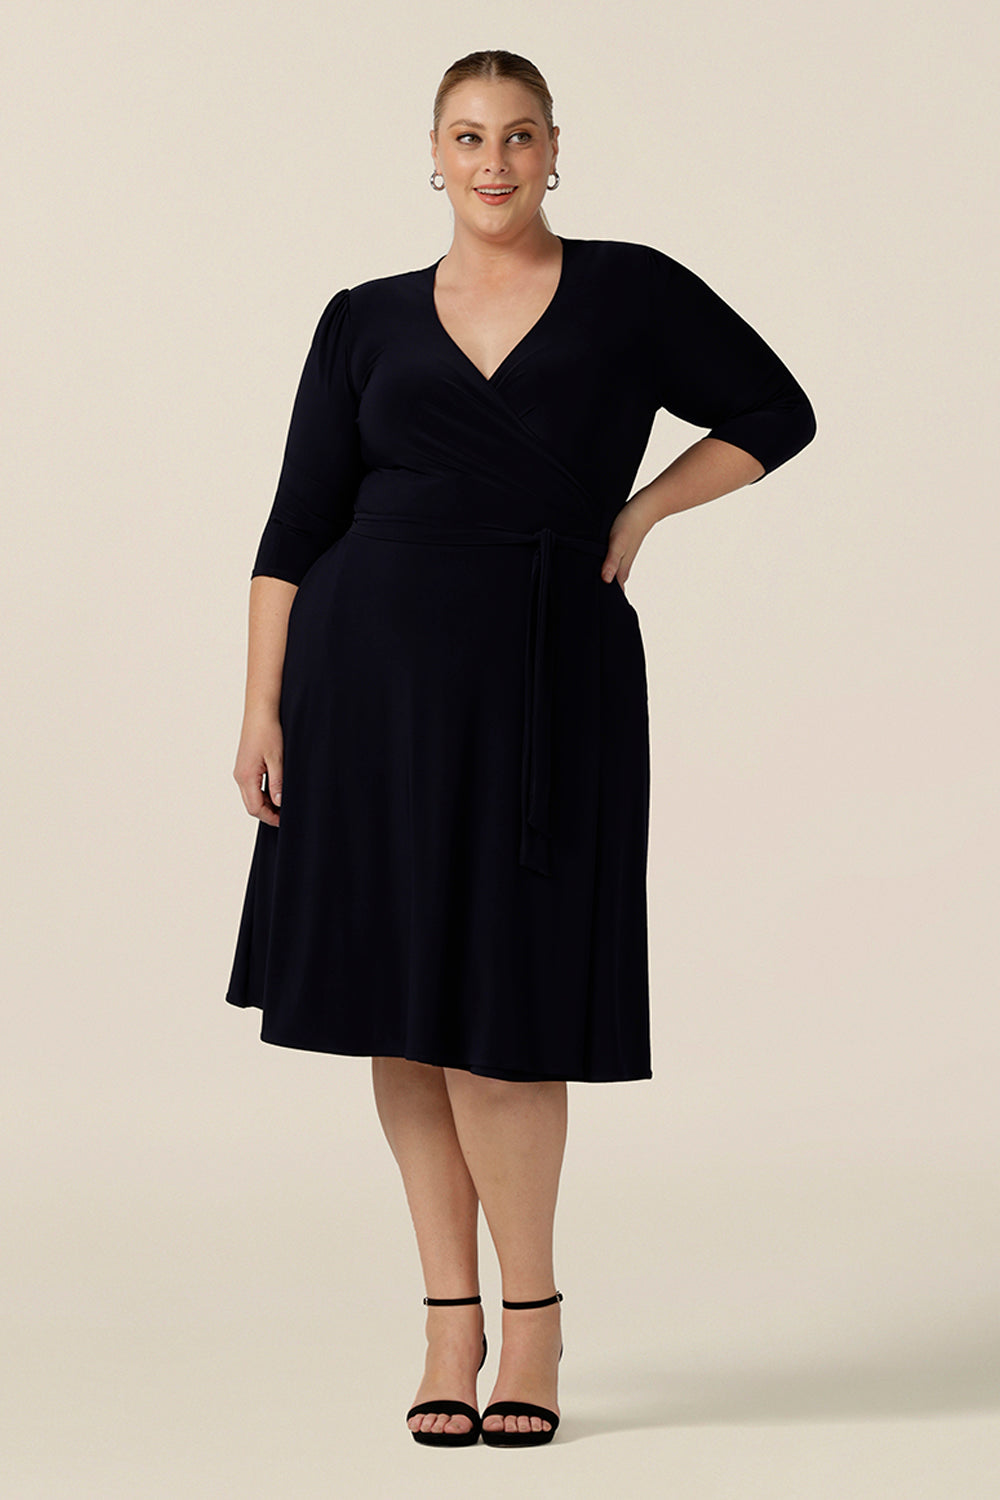 A classic knee length wrap dress in navy blue jersey looks elegant for evening and occasion wear. Shown on a fuller figure, size 18 woman, this plus size 3/4 sleeve event dress is made in Australia in dress sizes 8 to 24.